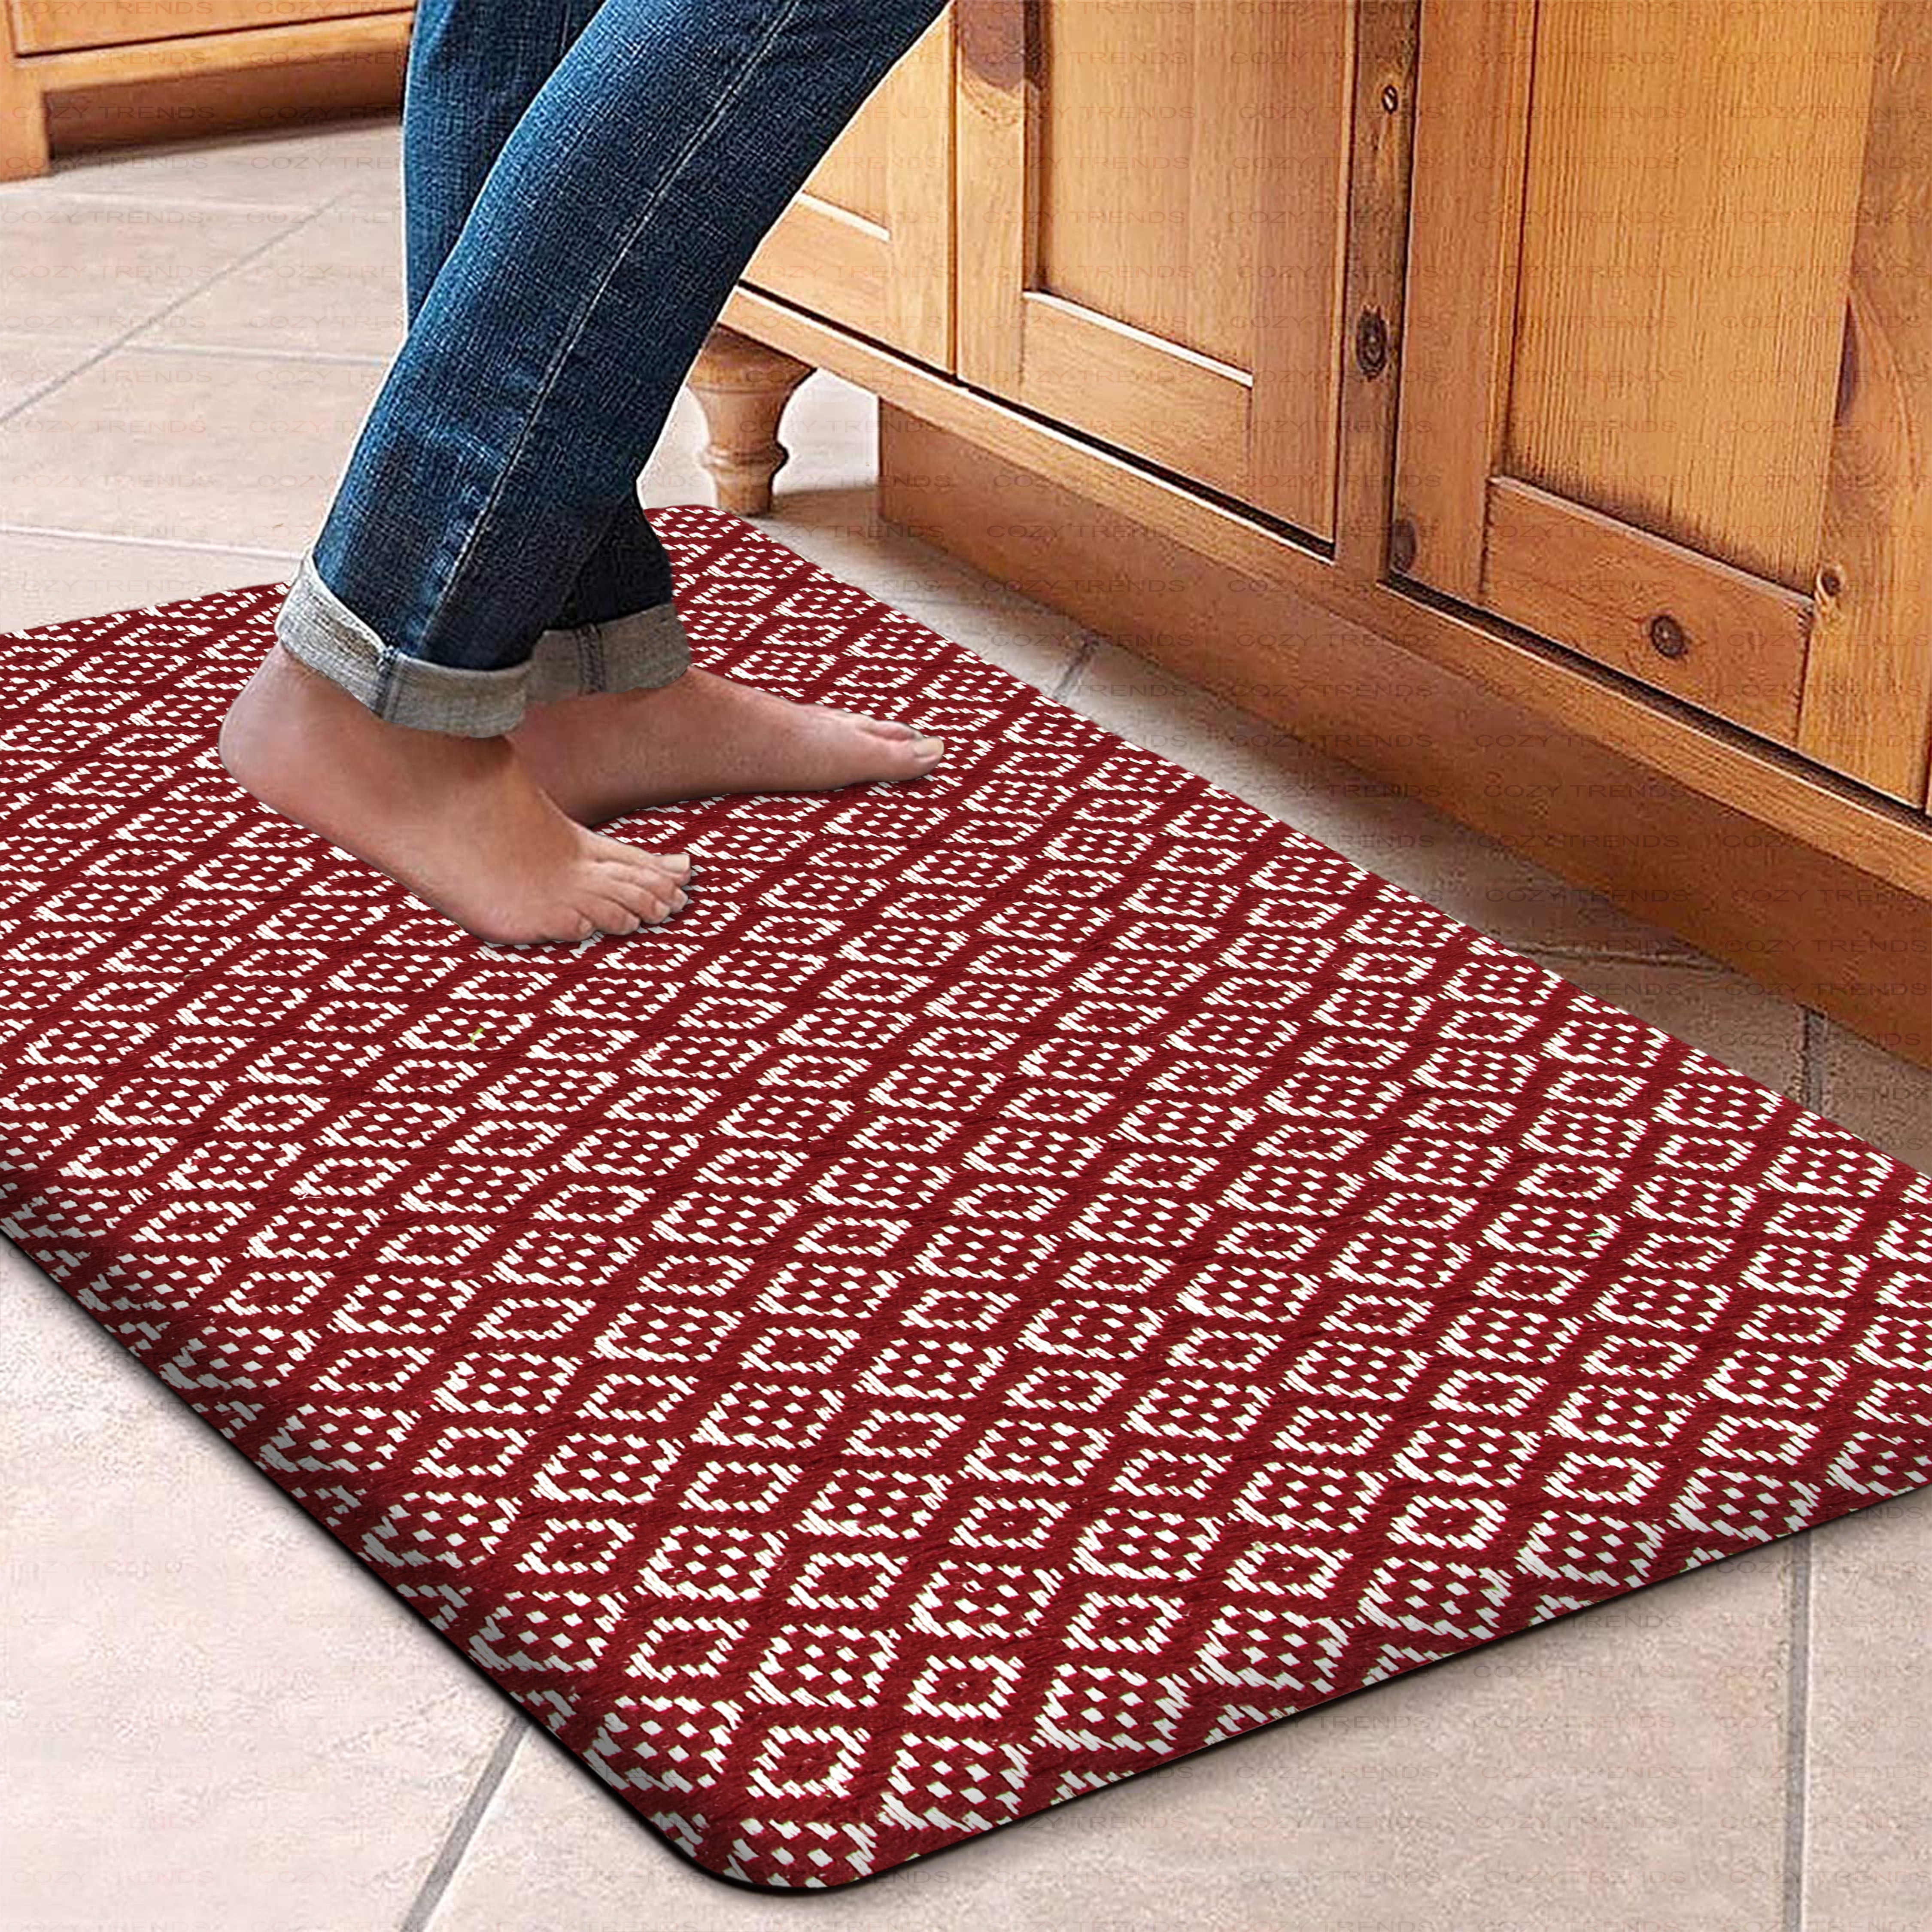 3d Wood Leaf Pattern Kitchen Rugs, Absorbent Non Slip Cushioned Rugs, Stain  Resistant Waterproof Long Strip Floor Mat, Comfort Standing Mats, Living  Room Bedroom Bathroom Kitchen Sink Laundry Office Area Rugs Runner